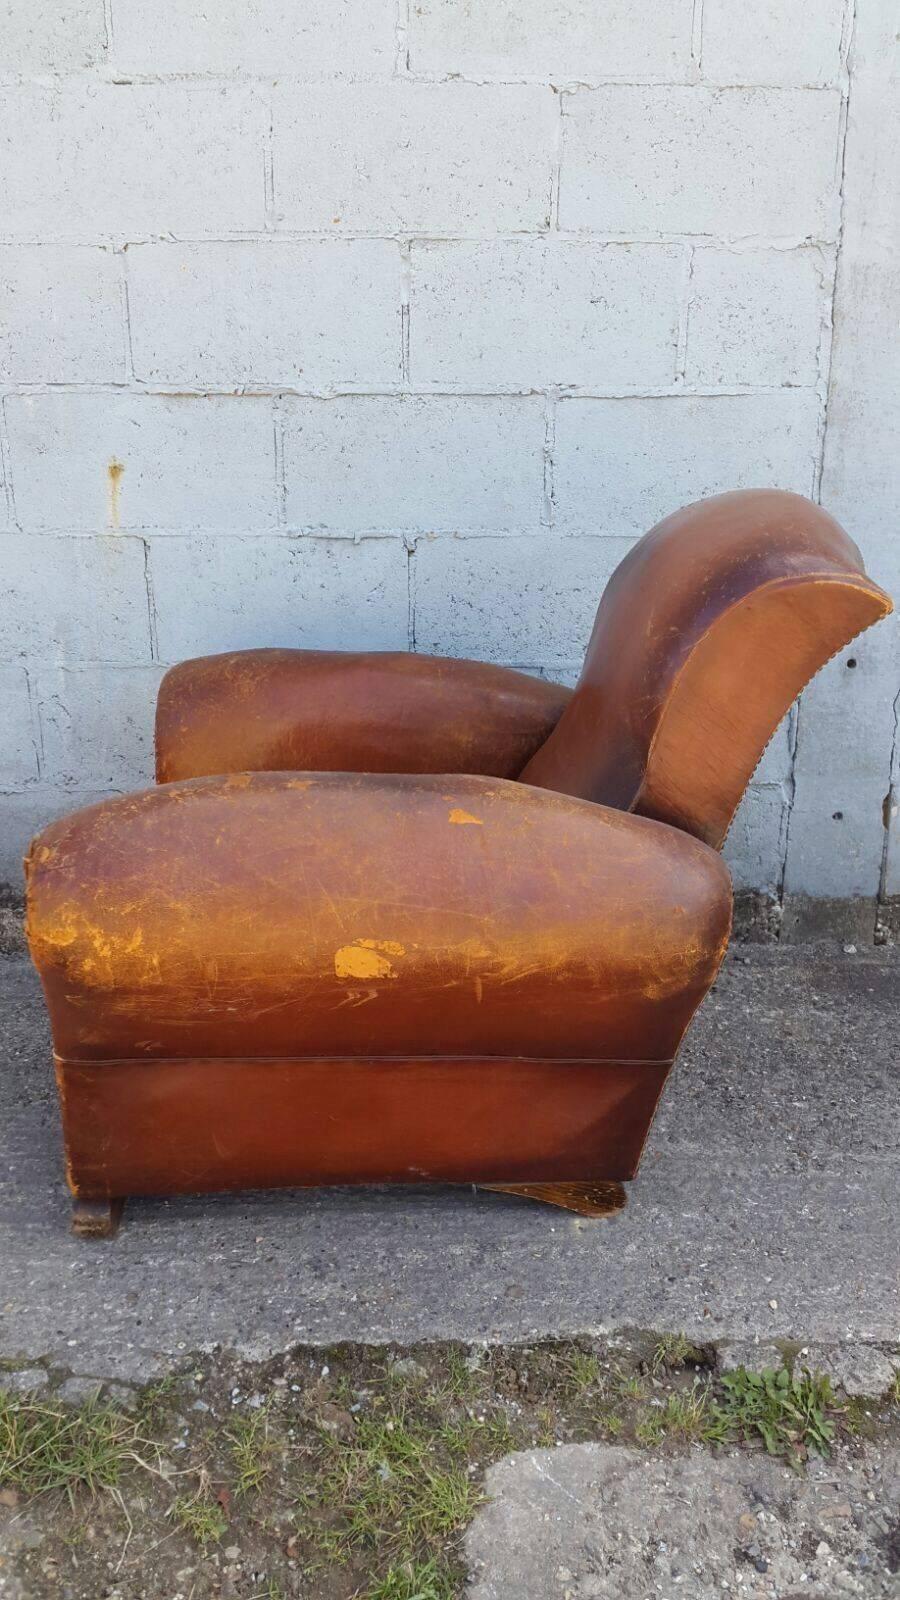 Rare Antique Rustic Vintage French Leather Club Chair, Industrial 
-Brilliant condition single french leather club chair.
-Beautiful dark brown leather with fantastic colouration wear. Very unusual shape.
-A real popular favourite, many more similar